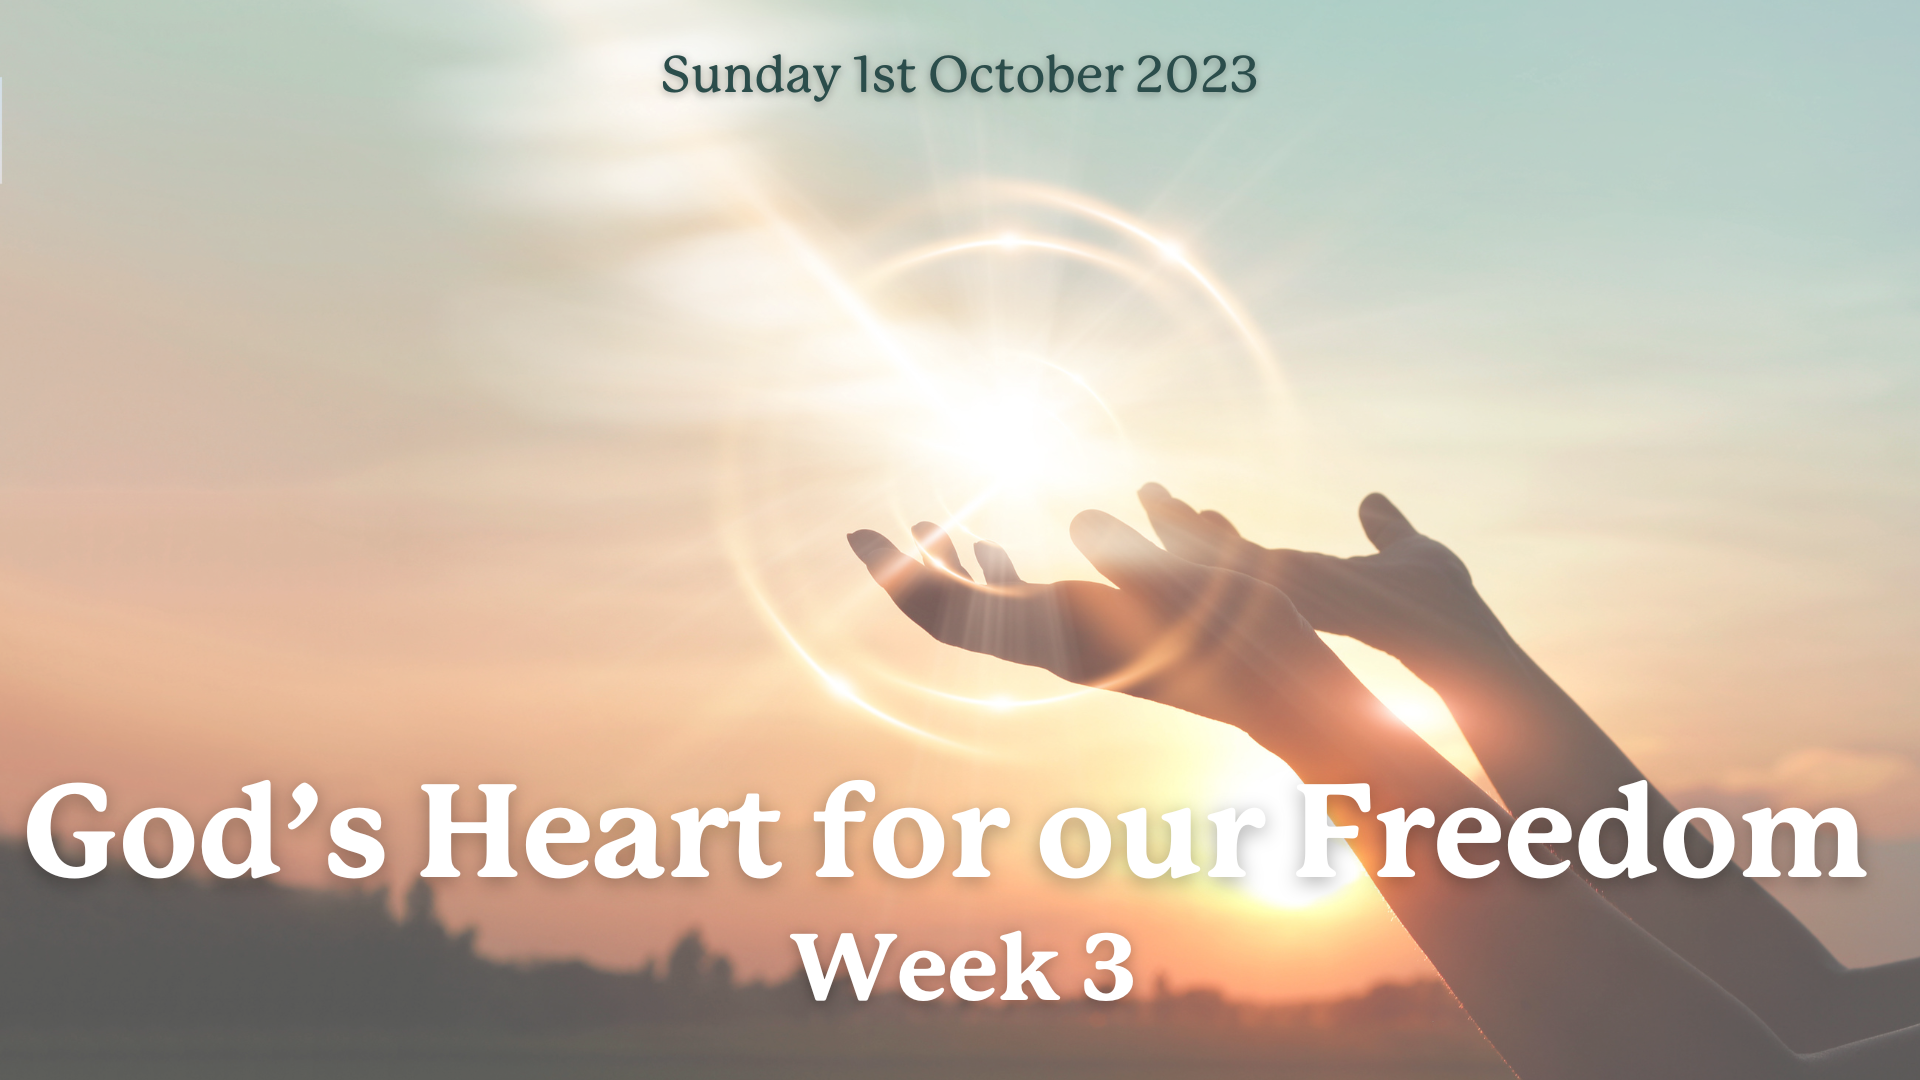 Sunday Service - God's Heart for your Freedom - Week 3